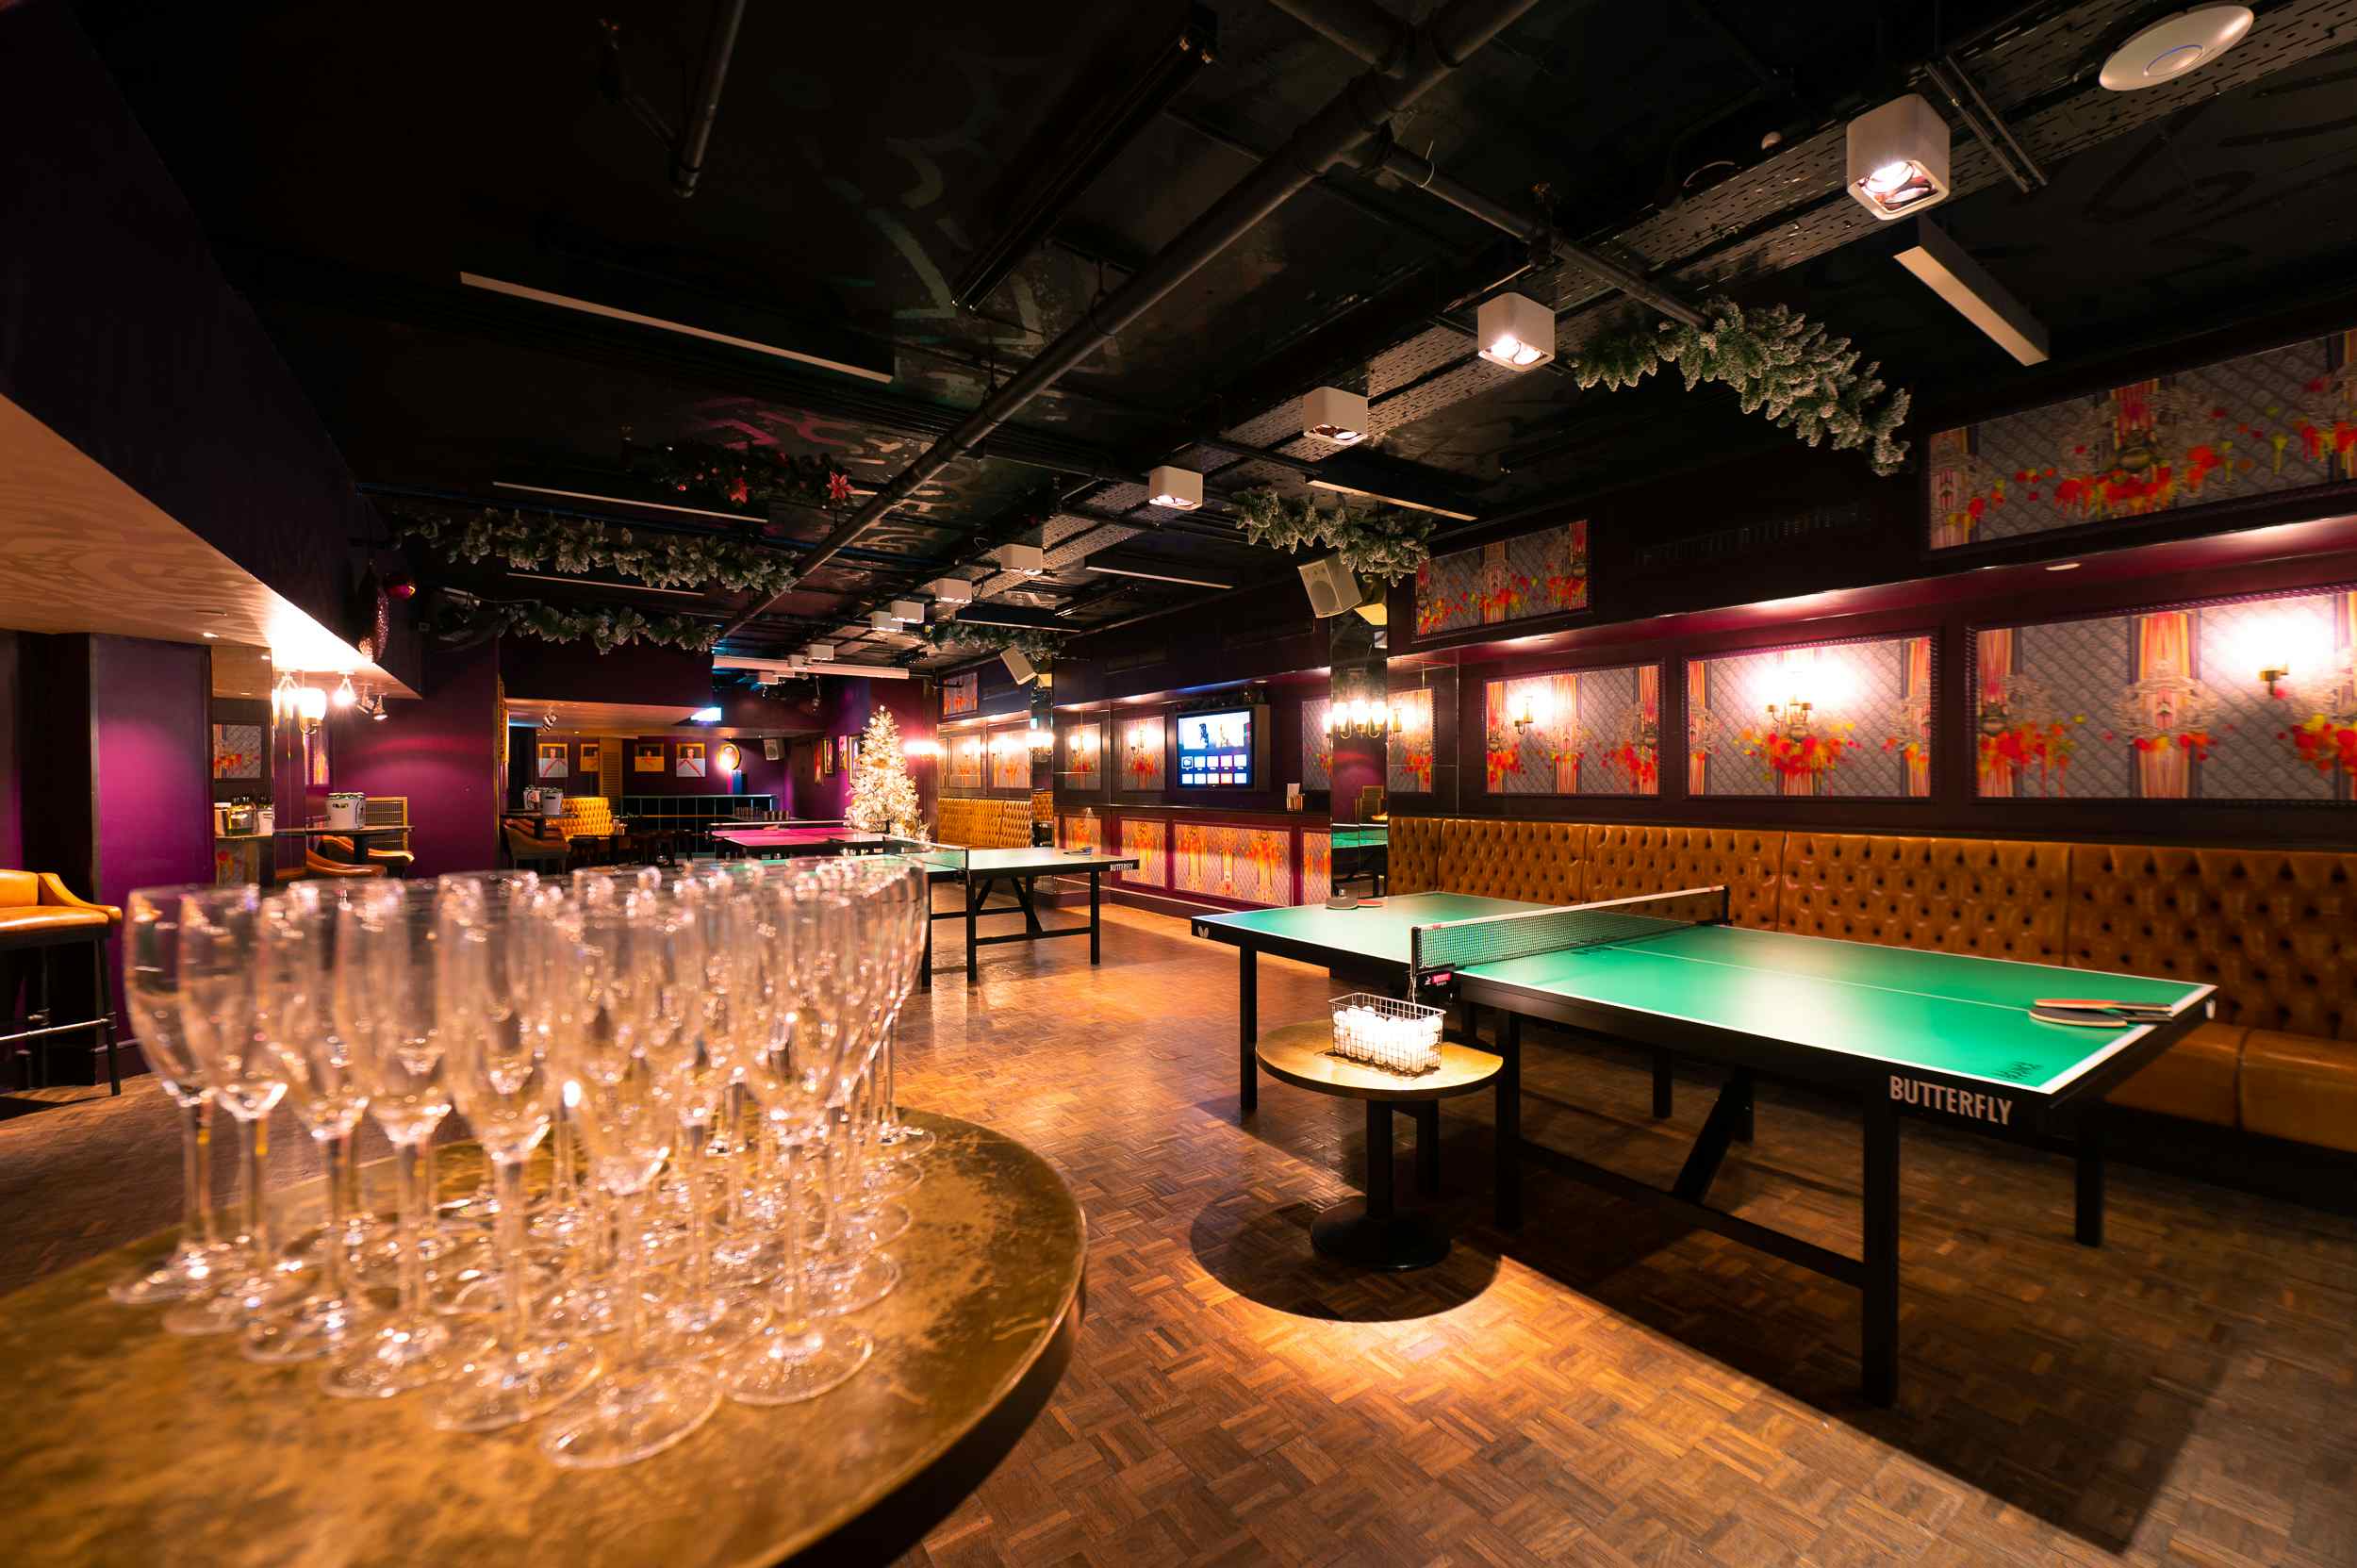 The Jaques Room - Parties & Celebrations, Bounce, Farringdon - The Home of Ping Pong